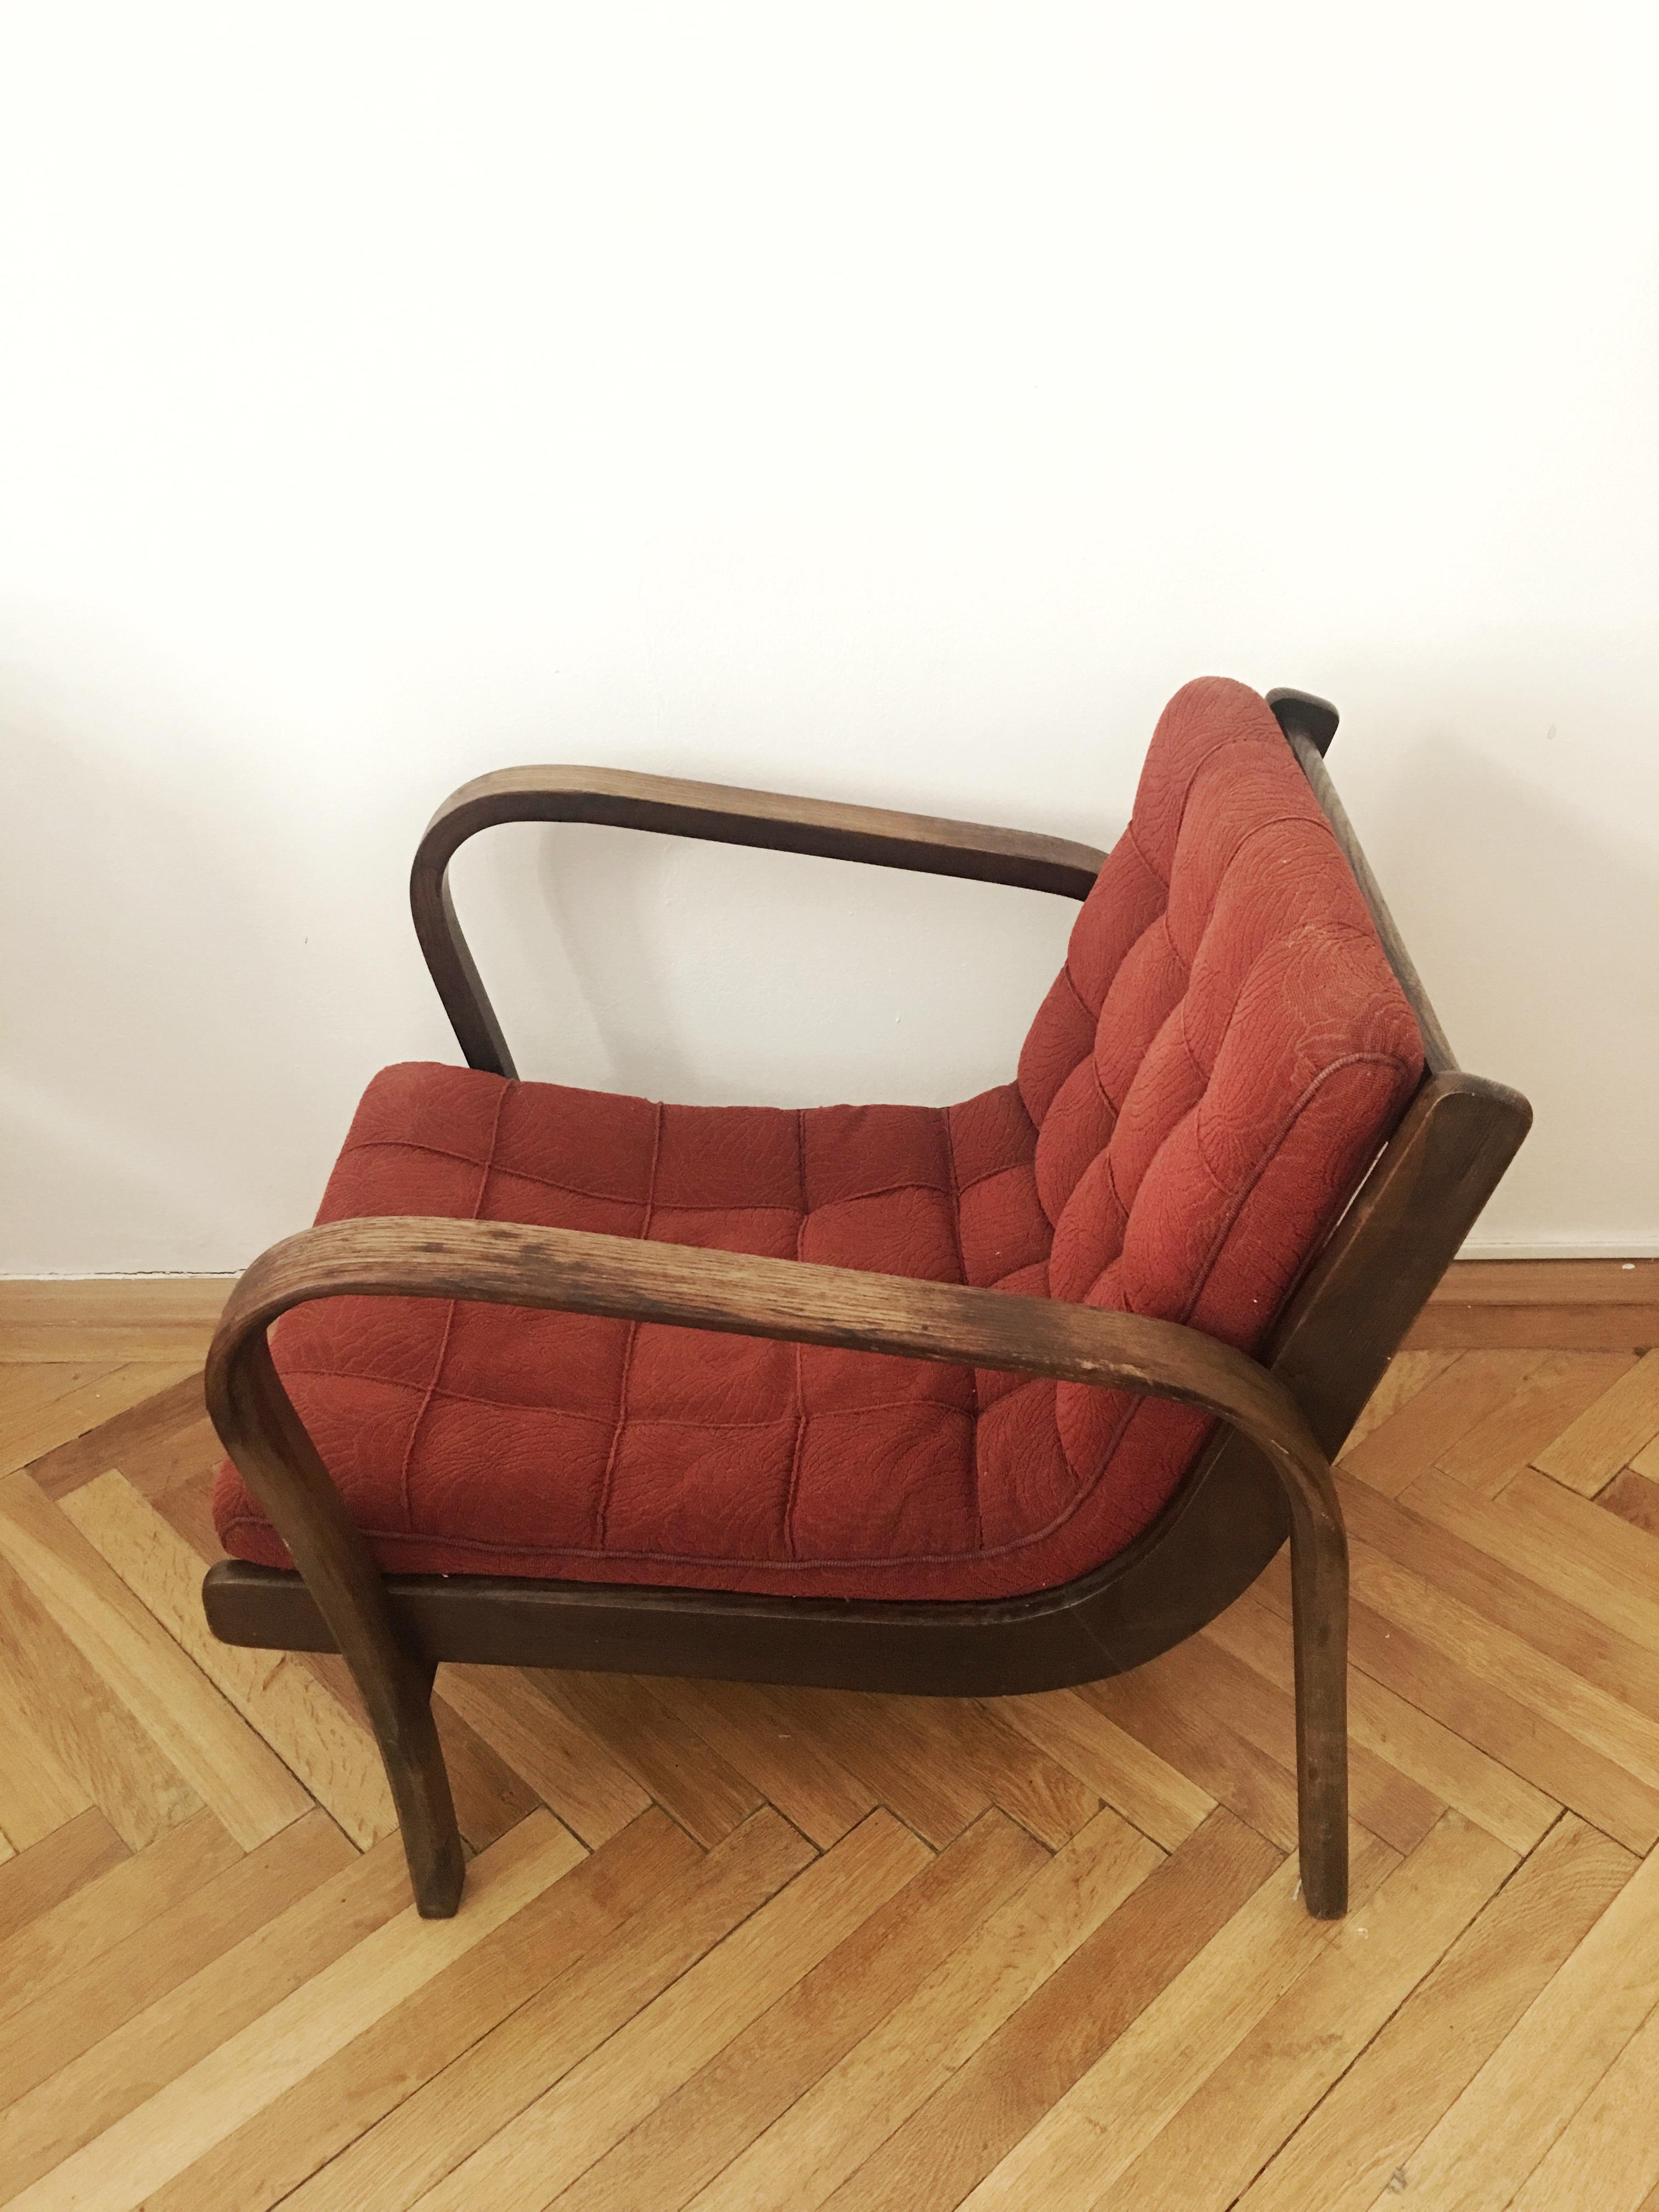 1940s lounge armchair made in Czechoslovakia and designed by Karel Kozelka & Antonin Kropacek. This model won the silver metal at the Triennale in 1944.
Measures: H 71 cm x W 65 cm x D 81 cm.